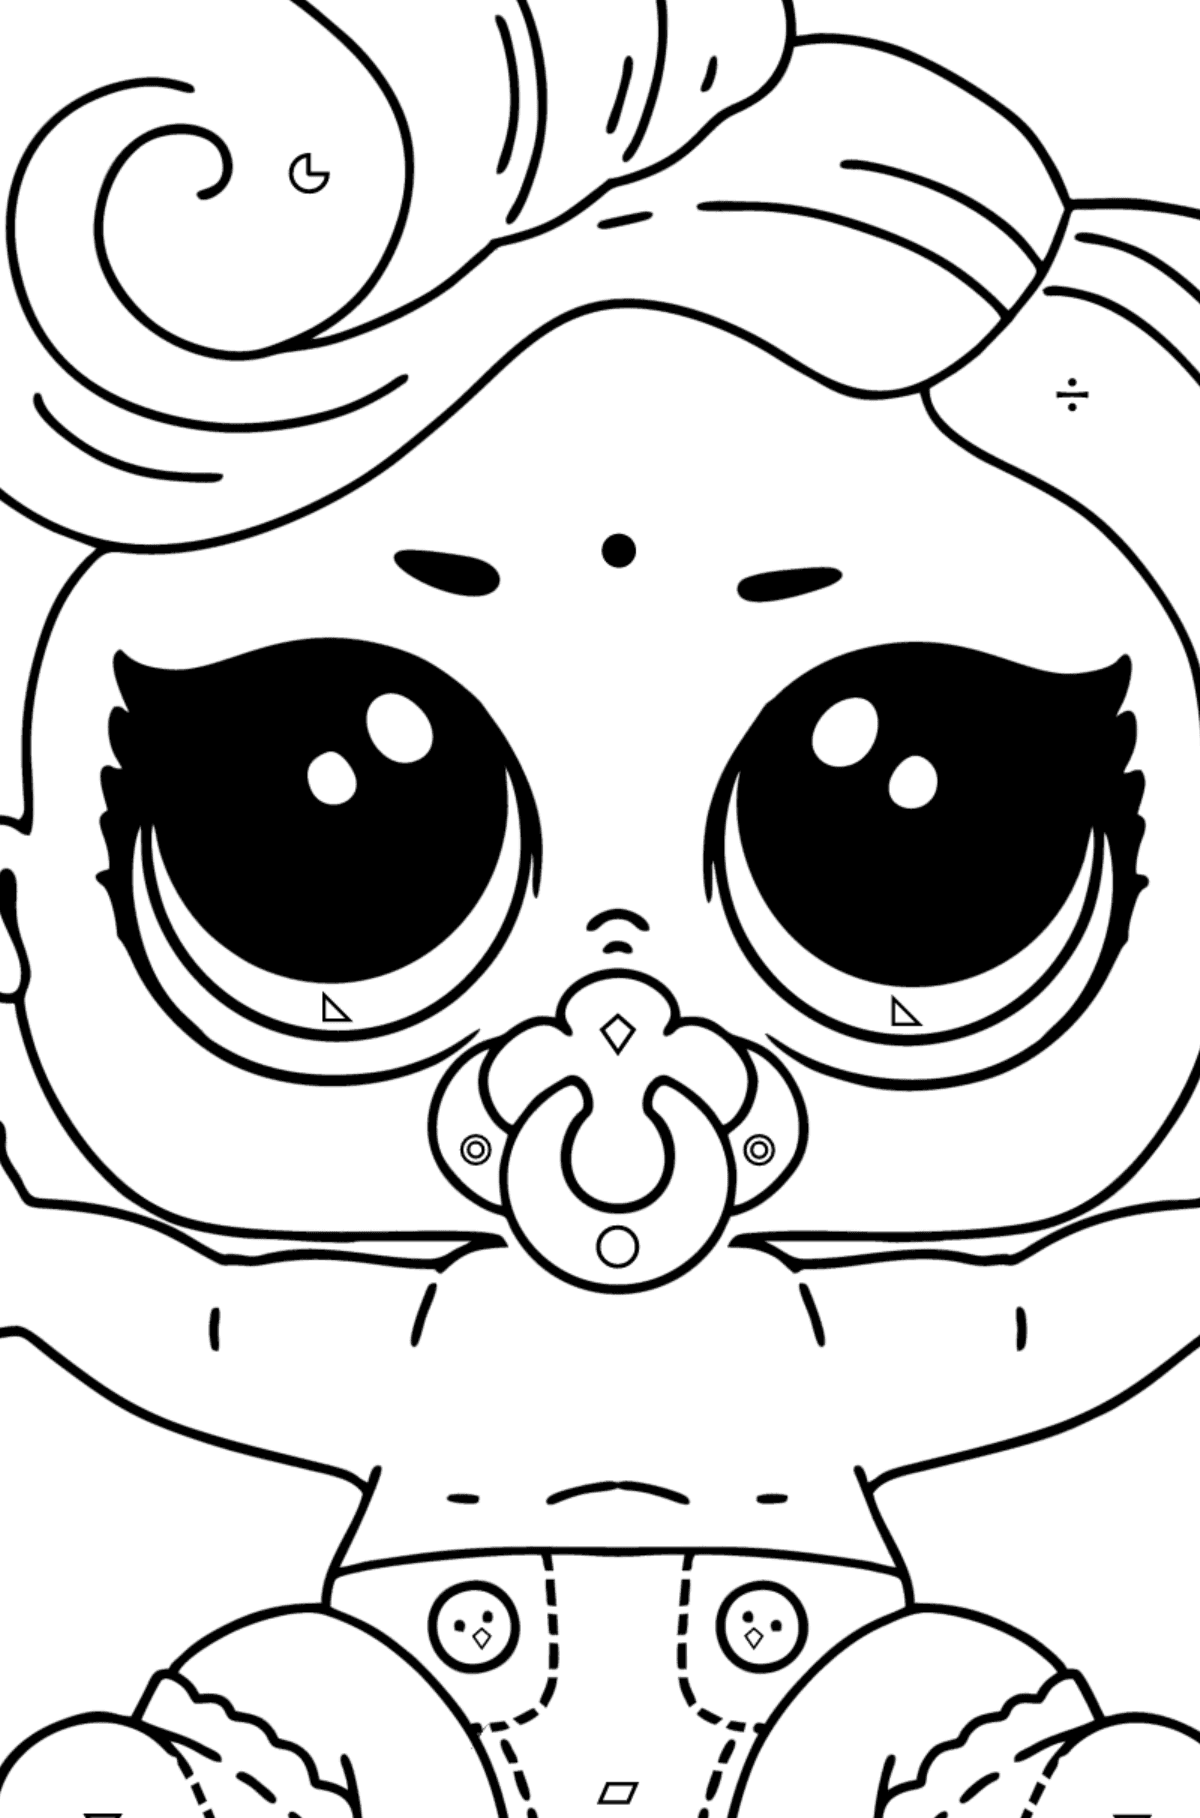 Coloring page LOL LIL Lux - Coloring by Symbols and Geometric Shapes for Kids